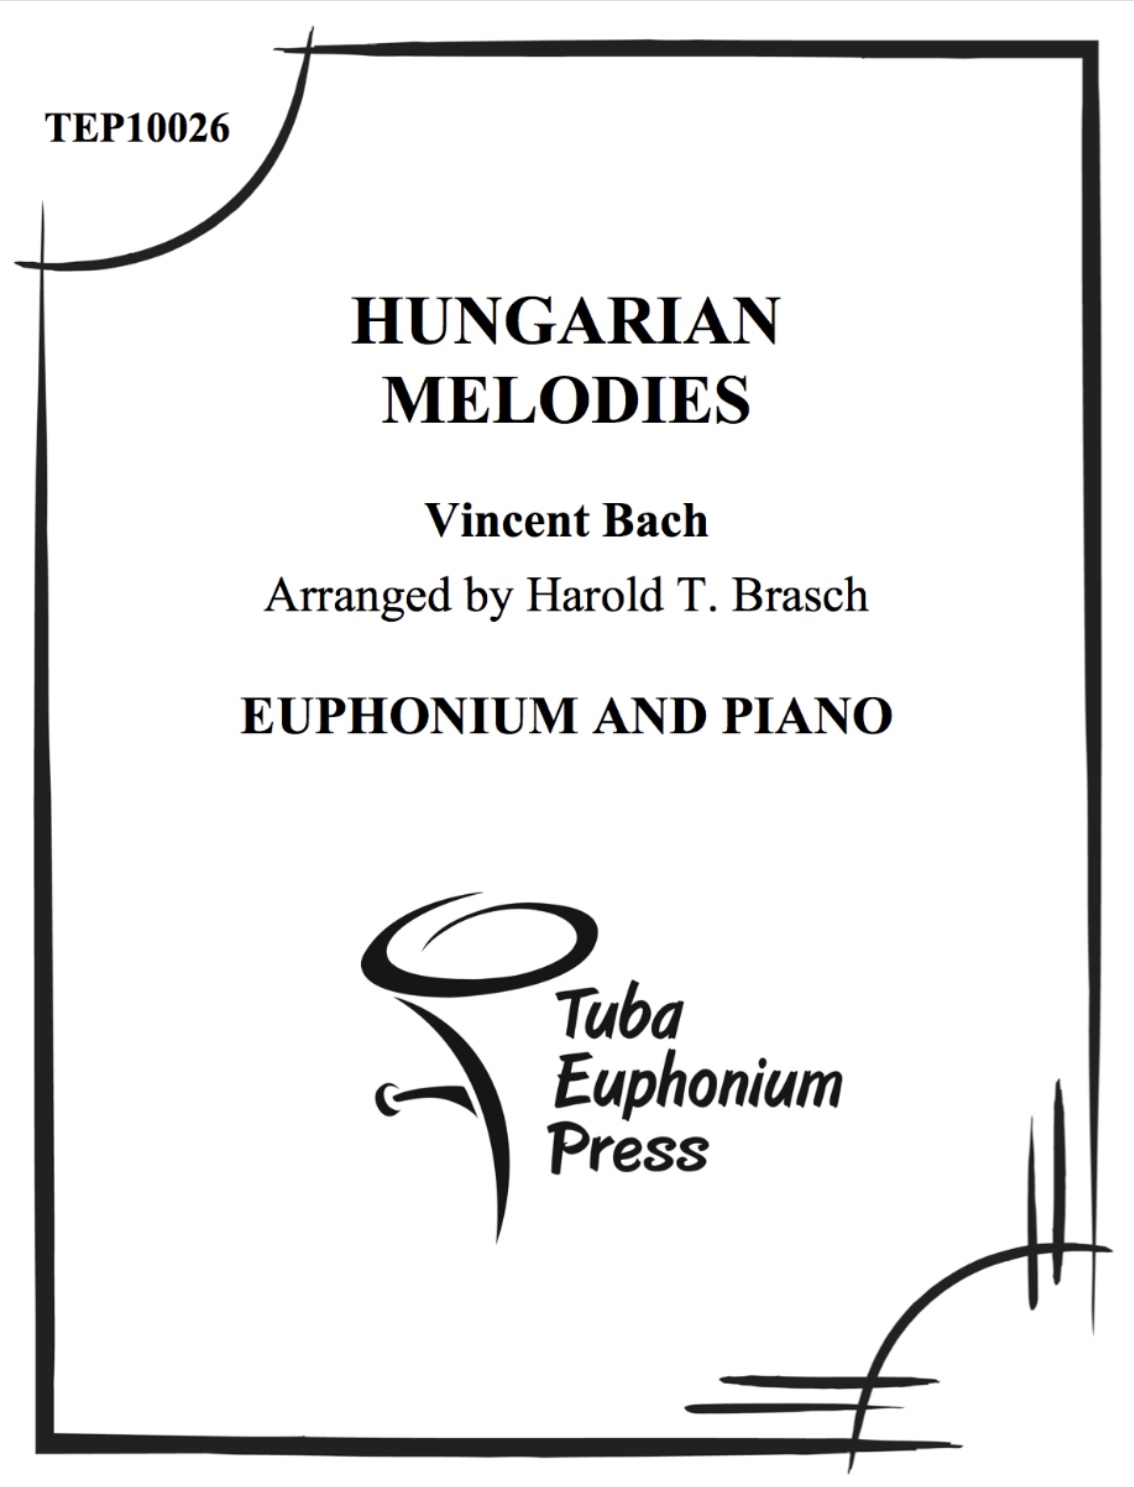 Hungarian Melodies - Vincent Bach Arr. Harold Brasch - Euphonium and Piano 